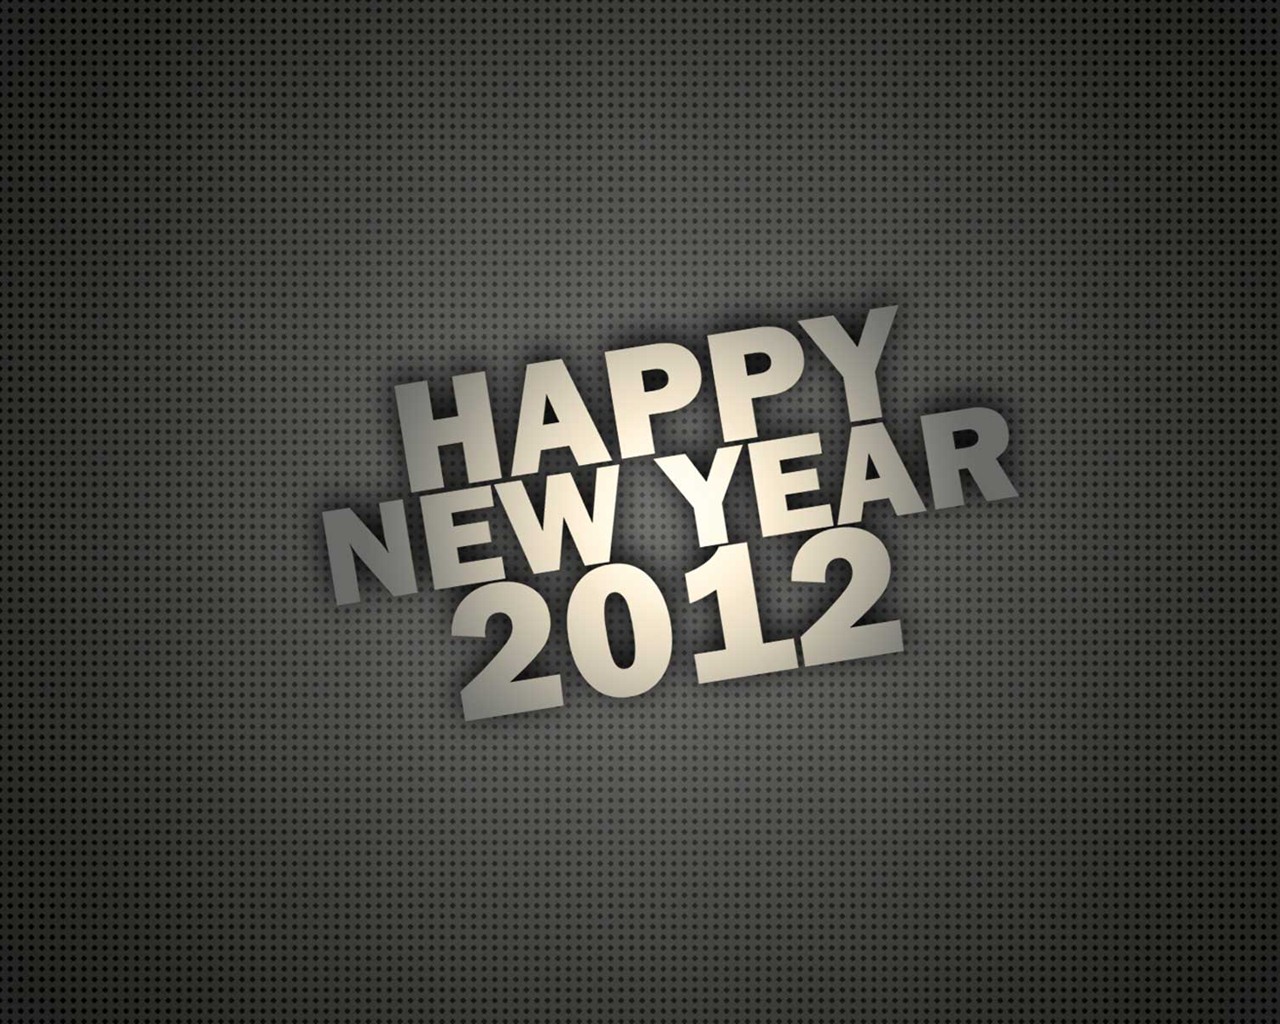 2012 New Year wallpapers (2) #4 - 1280x1024